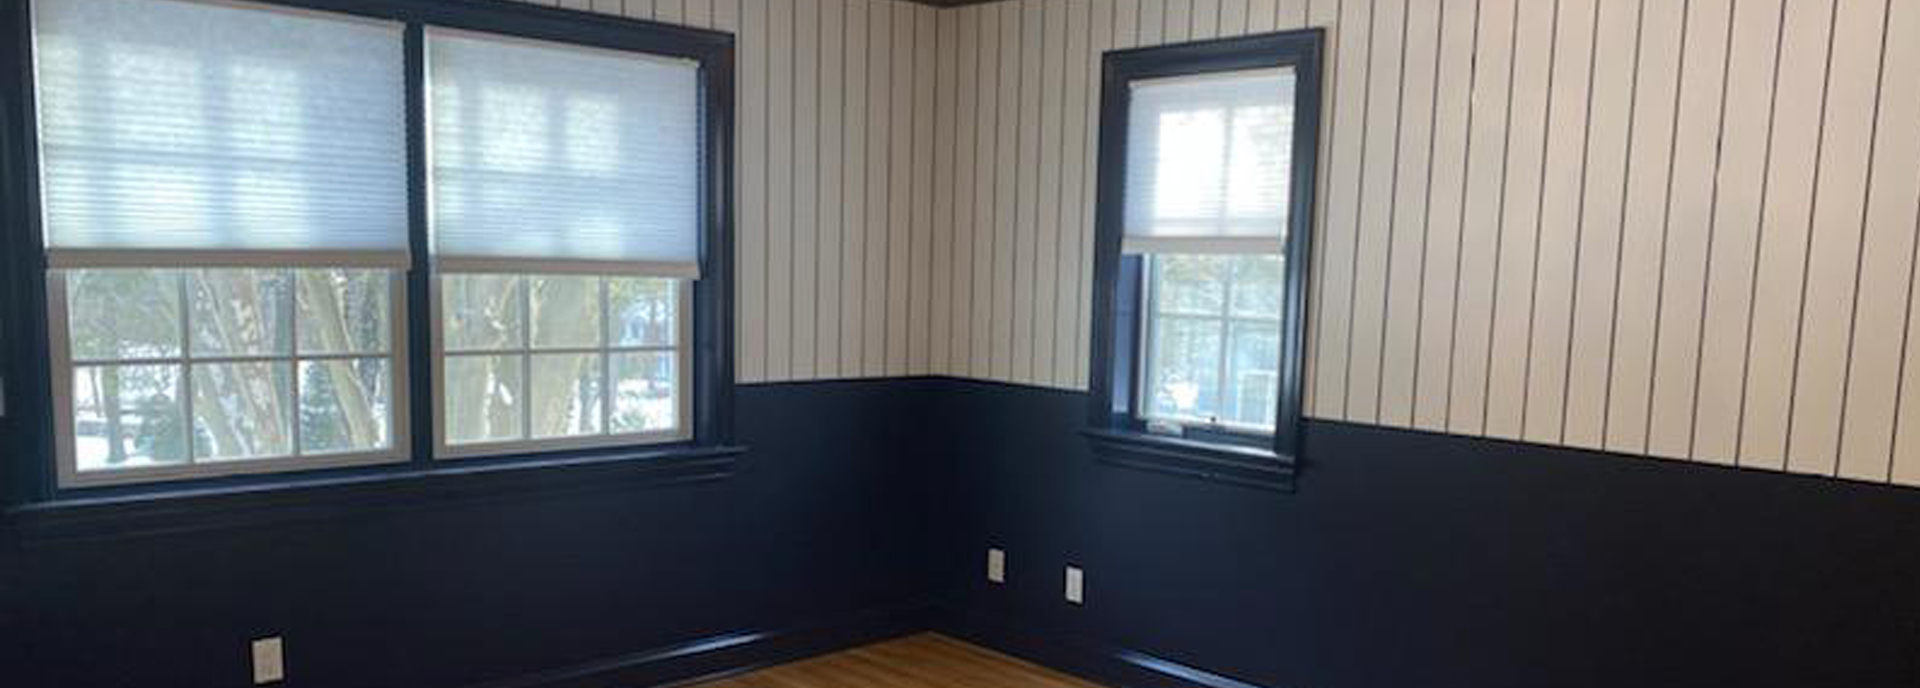 Professional bedroom Interior painting after Stamford, CT